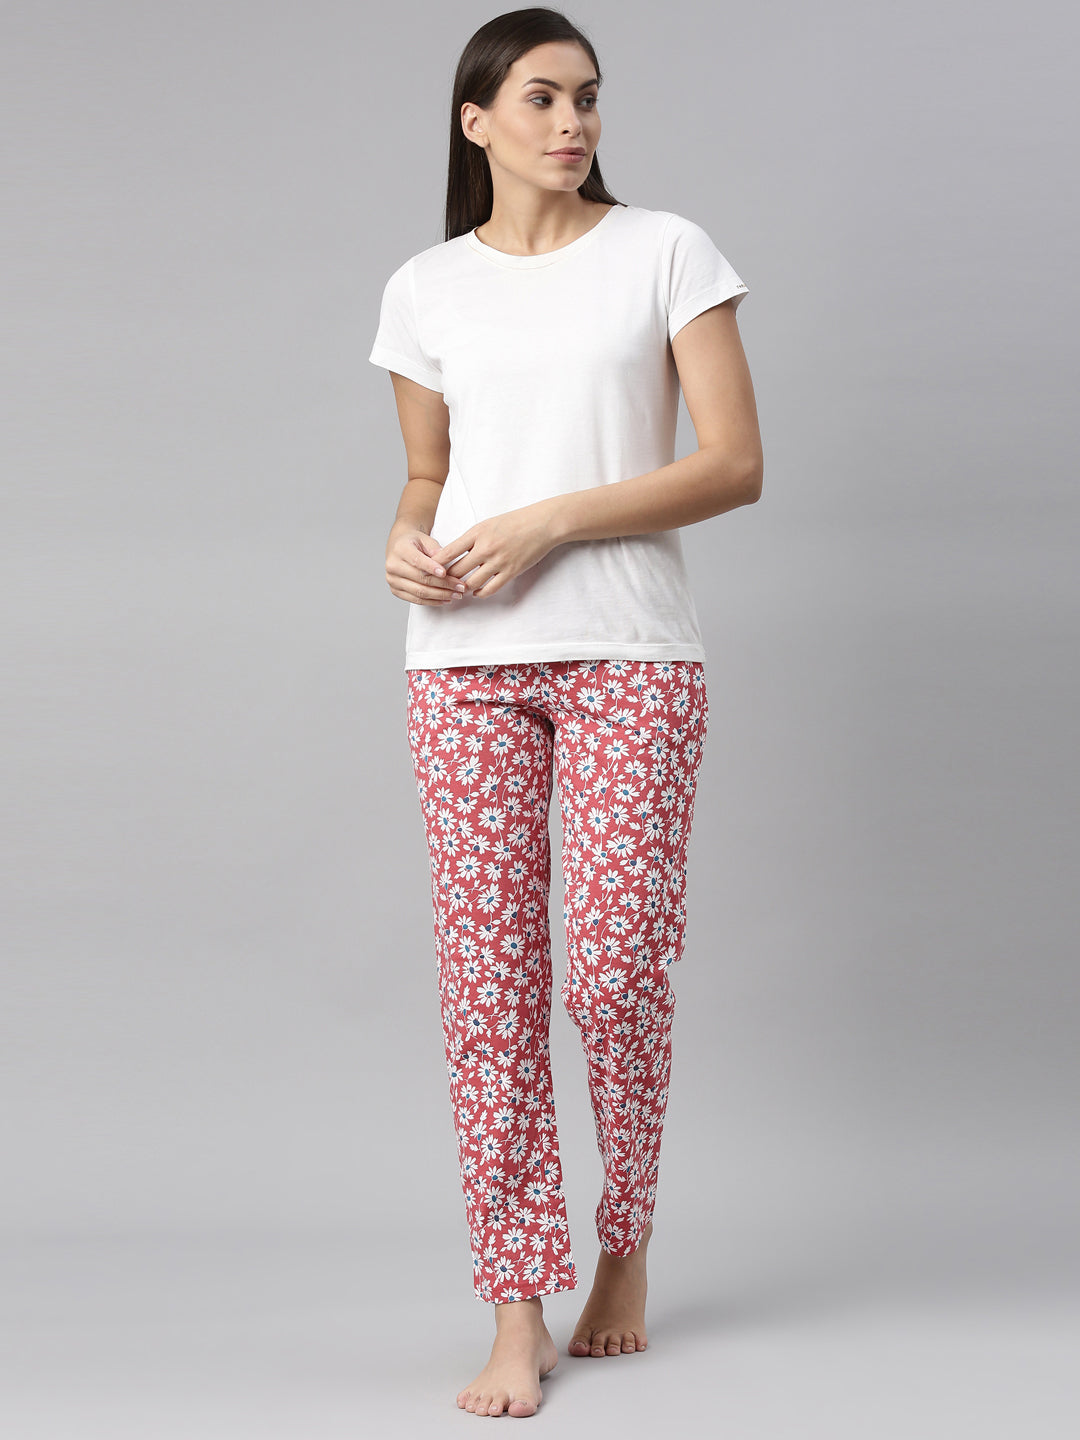 Women Red Pants | Explore our New Arrivals | ZARA United States